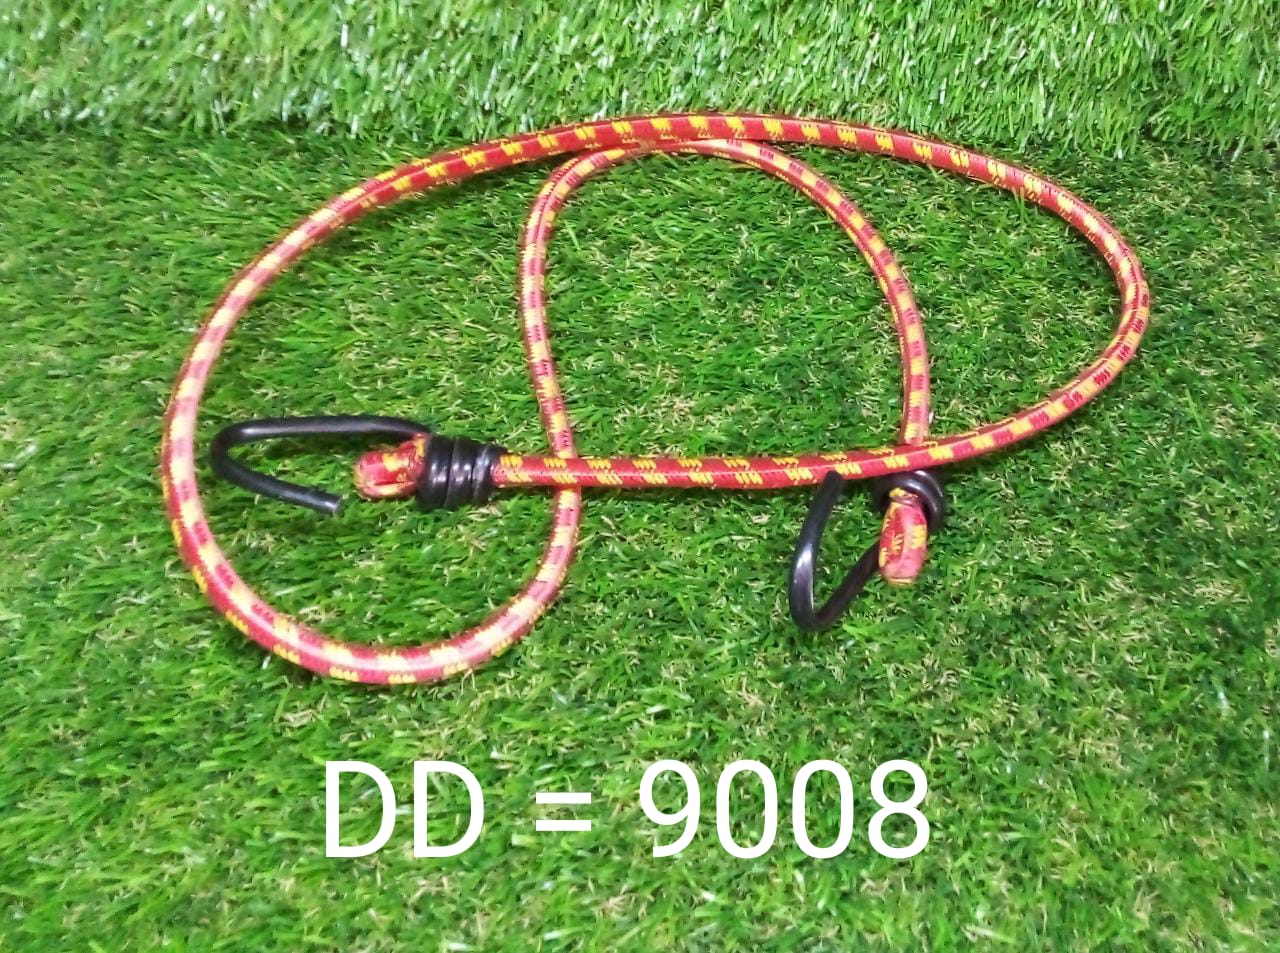 9008 Bungee Rope 4 Feet for holding and supporting things including all types of purposes.